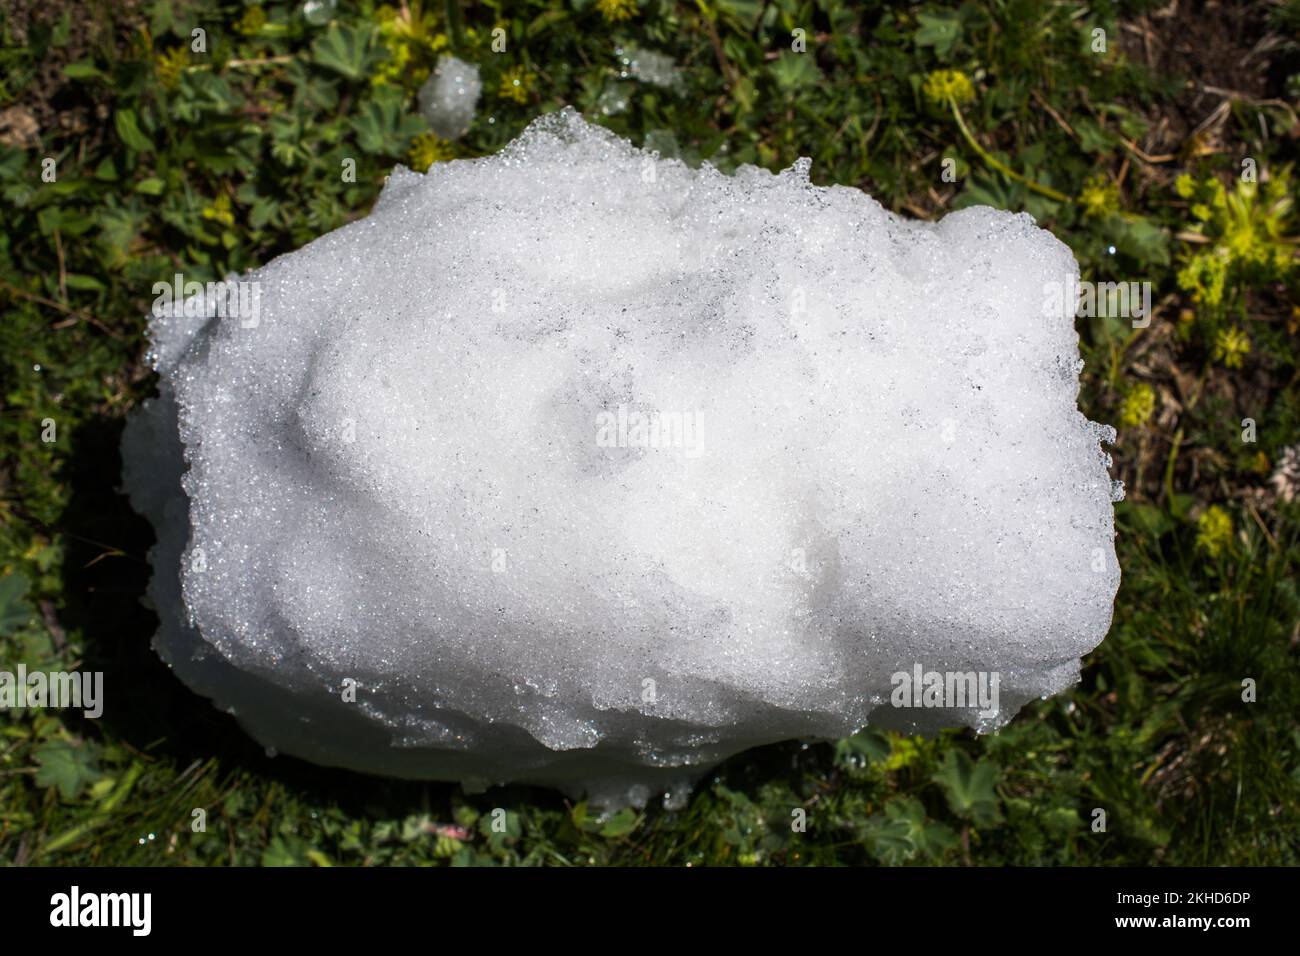 Little amount of snow put in the green grass background Stock Photo